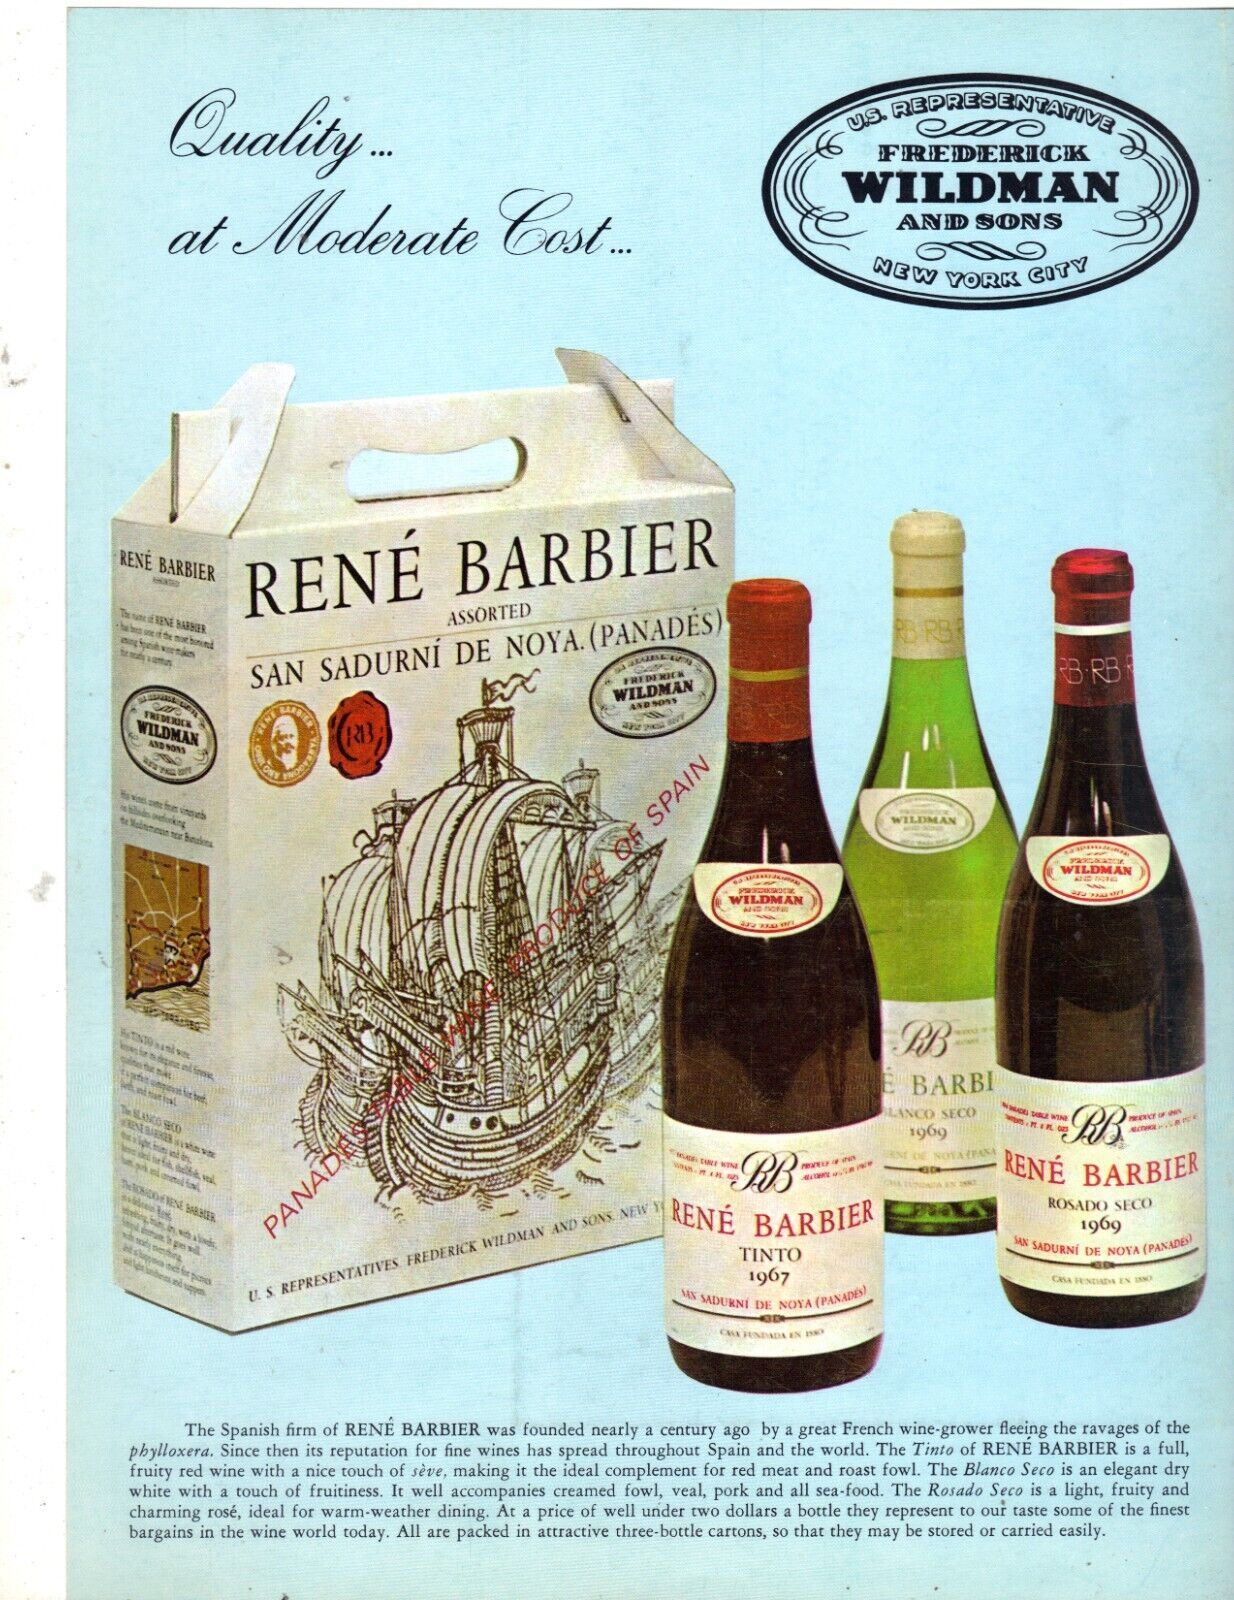 Vintage 1971 Print Ad for Rene Barbier Wines and The Wine Vault